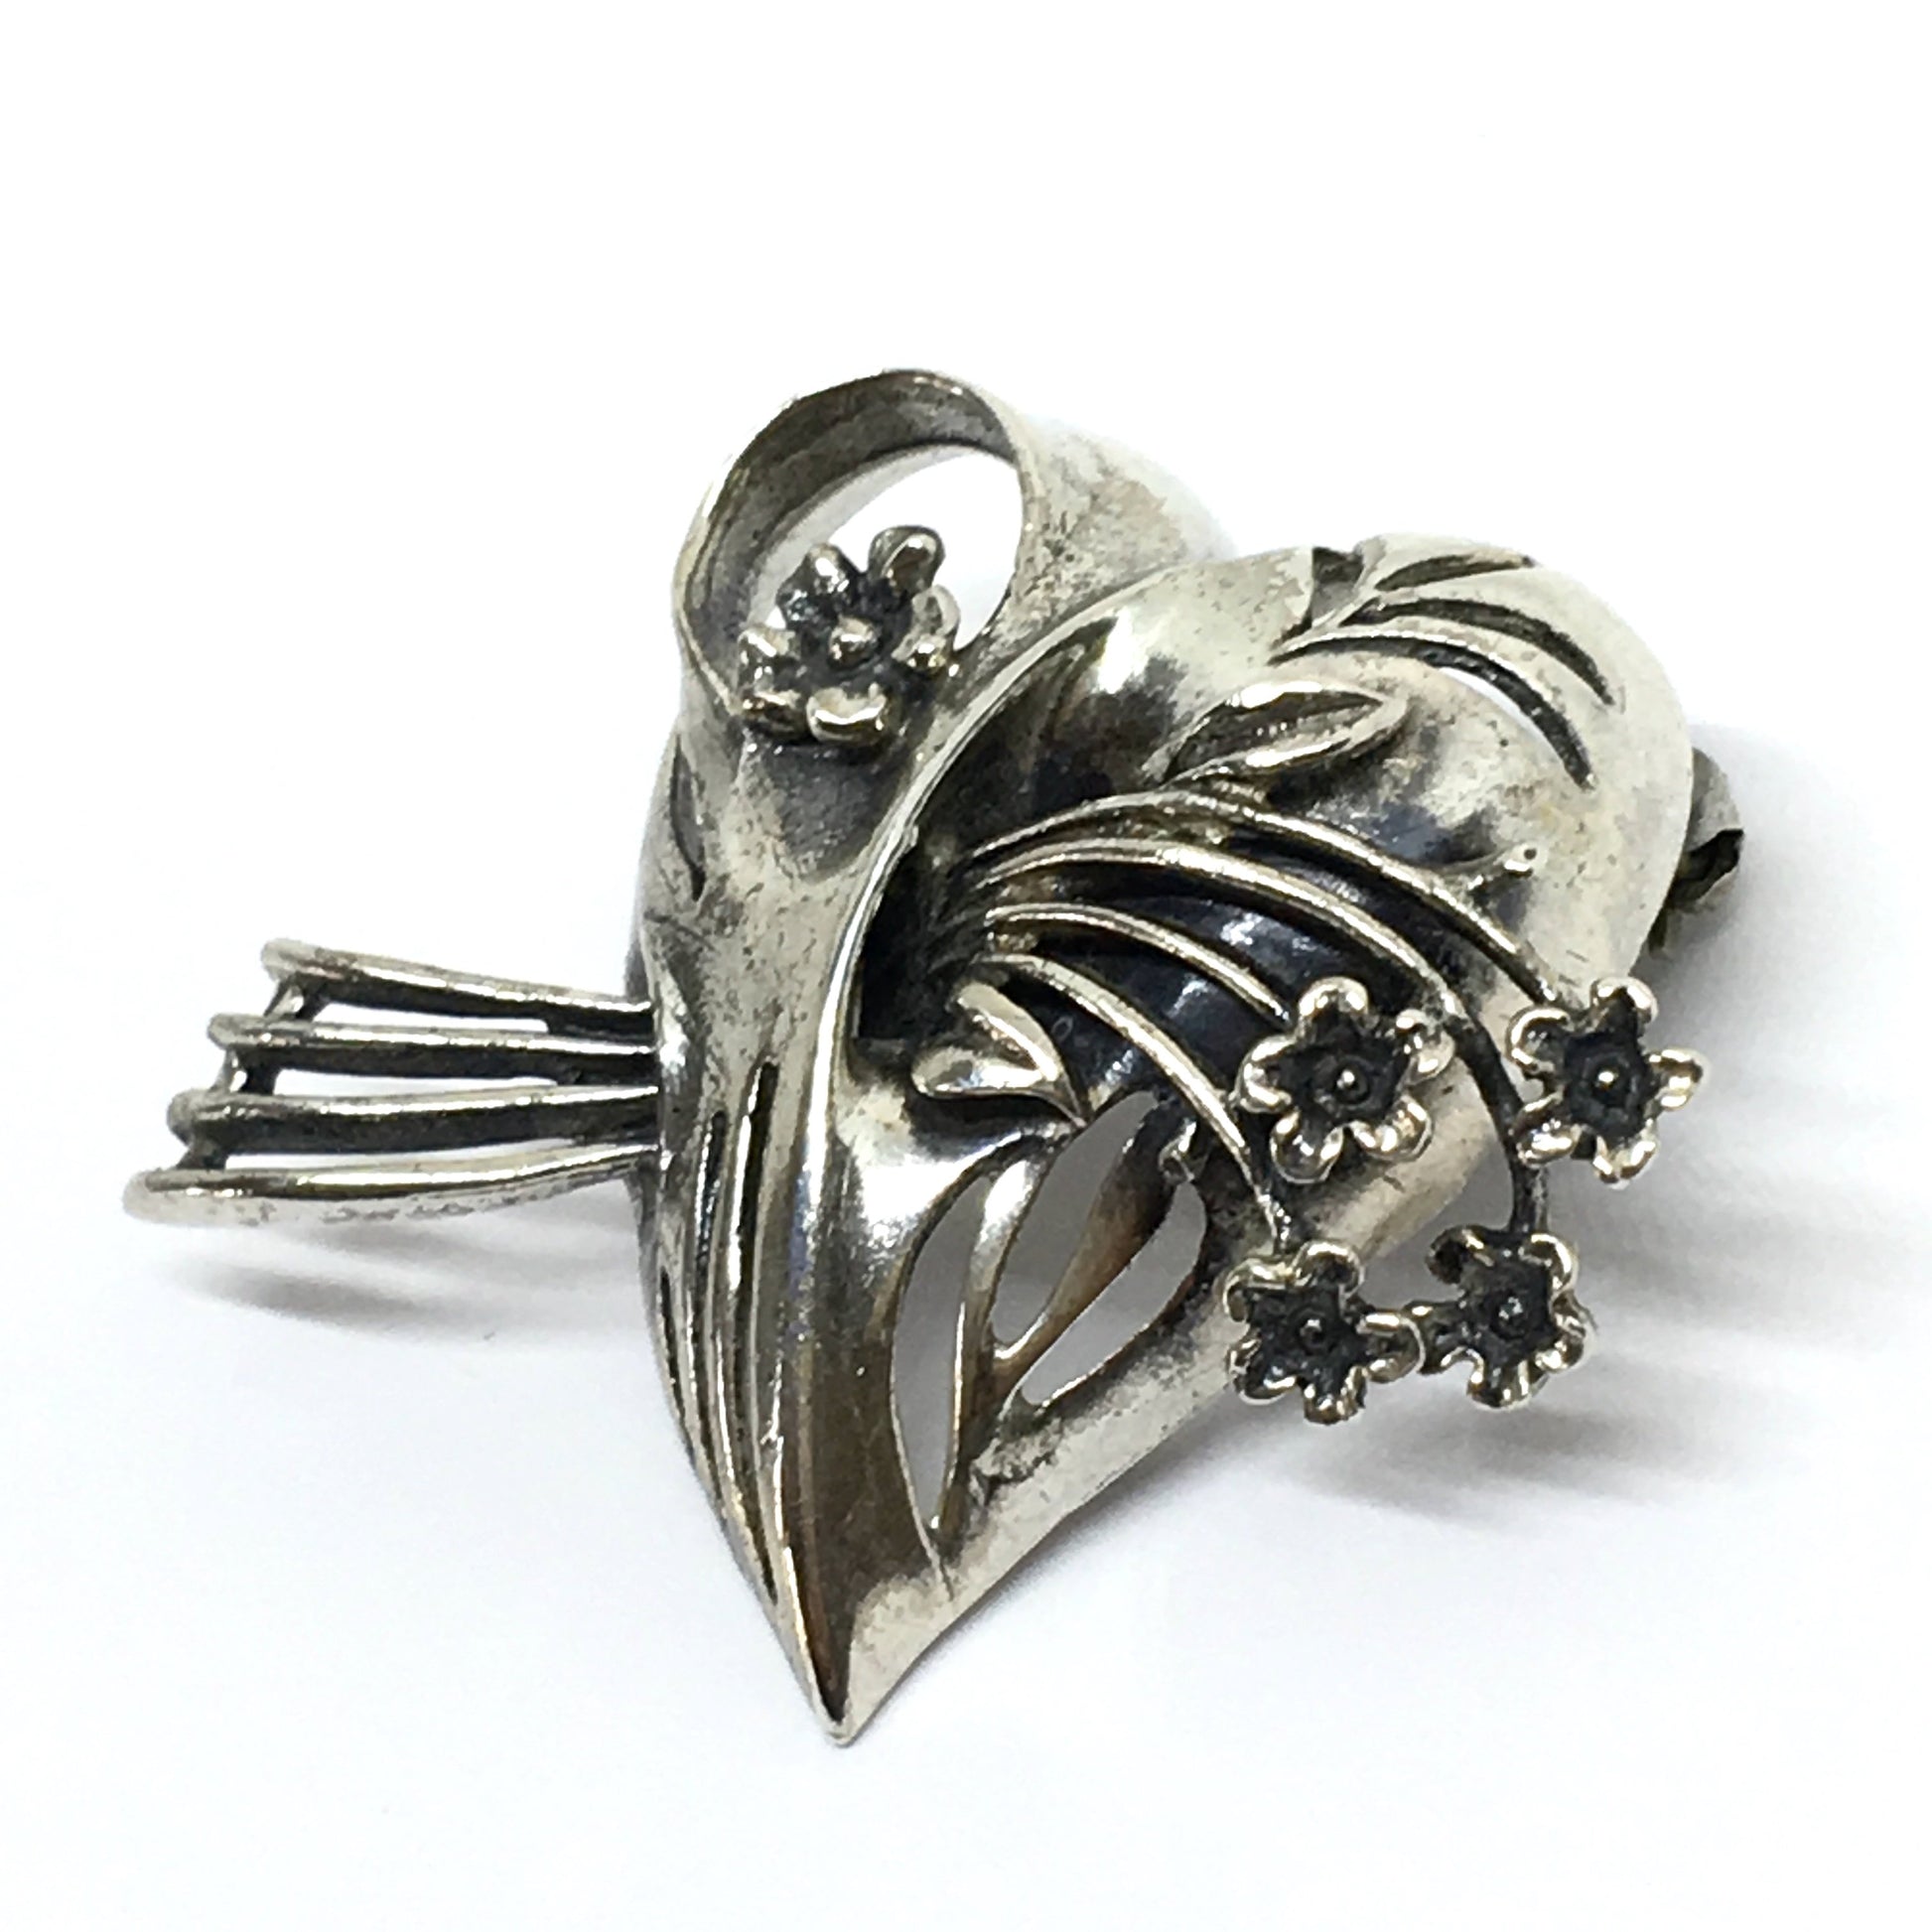 Brooches & Lapel Pins - Sterling Silver Dramatic 3D Style Broken Heart Brooch - Goth style Pin - Mens Womens Floral Statement Brooch - Blingschlingers Jewelry online